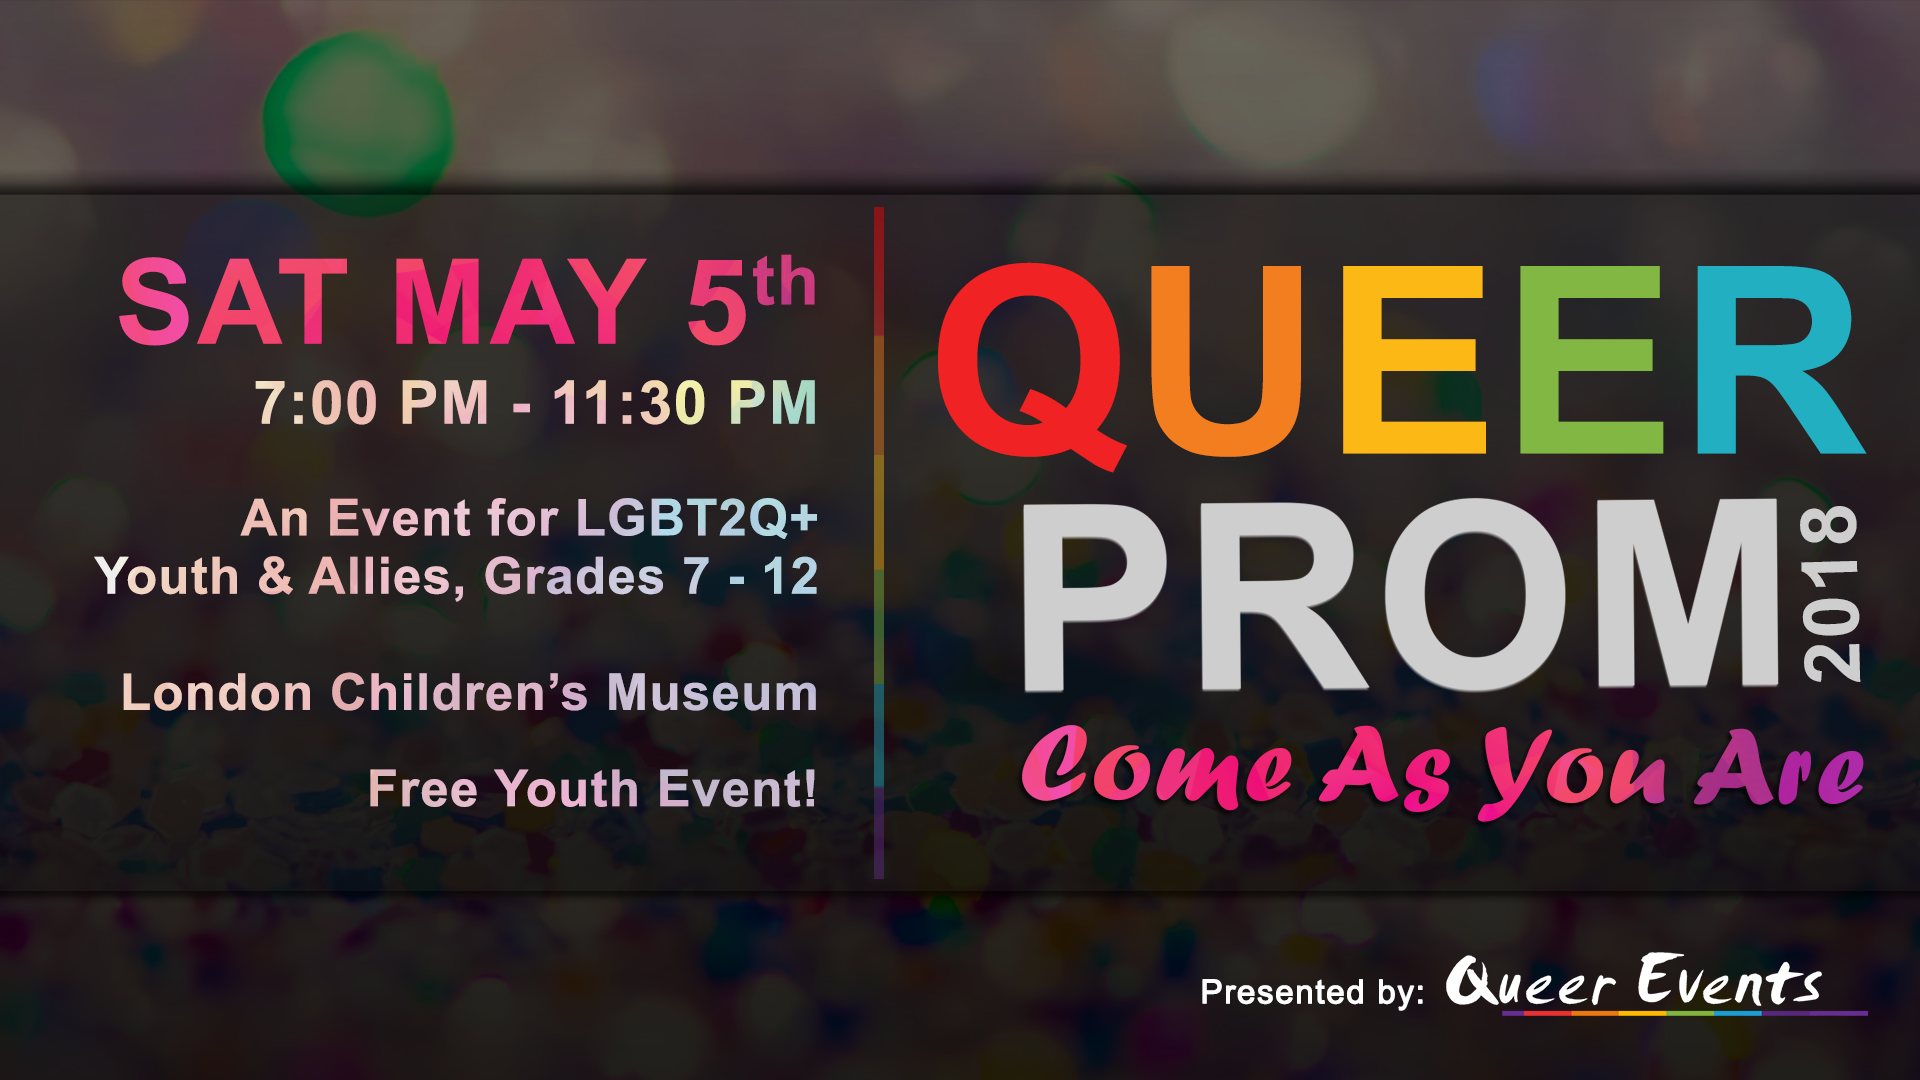 Queer Events presensts Queer Prom for Youth 2018